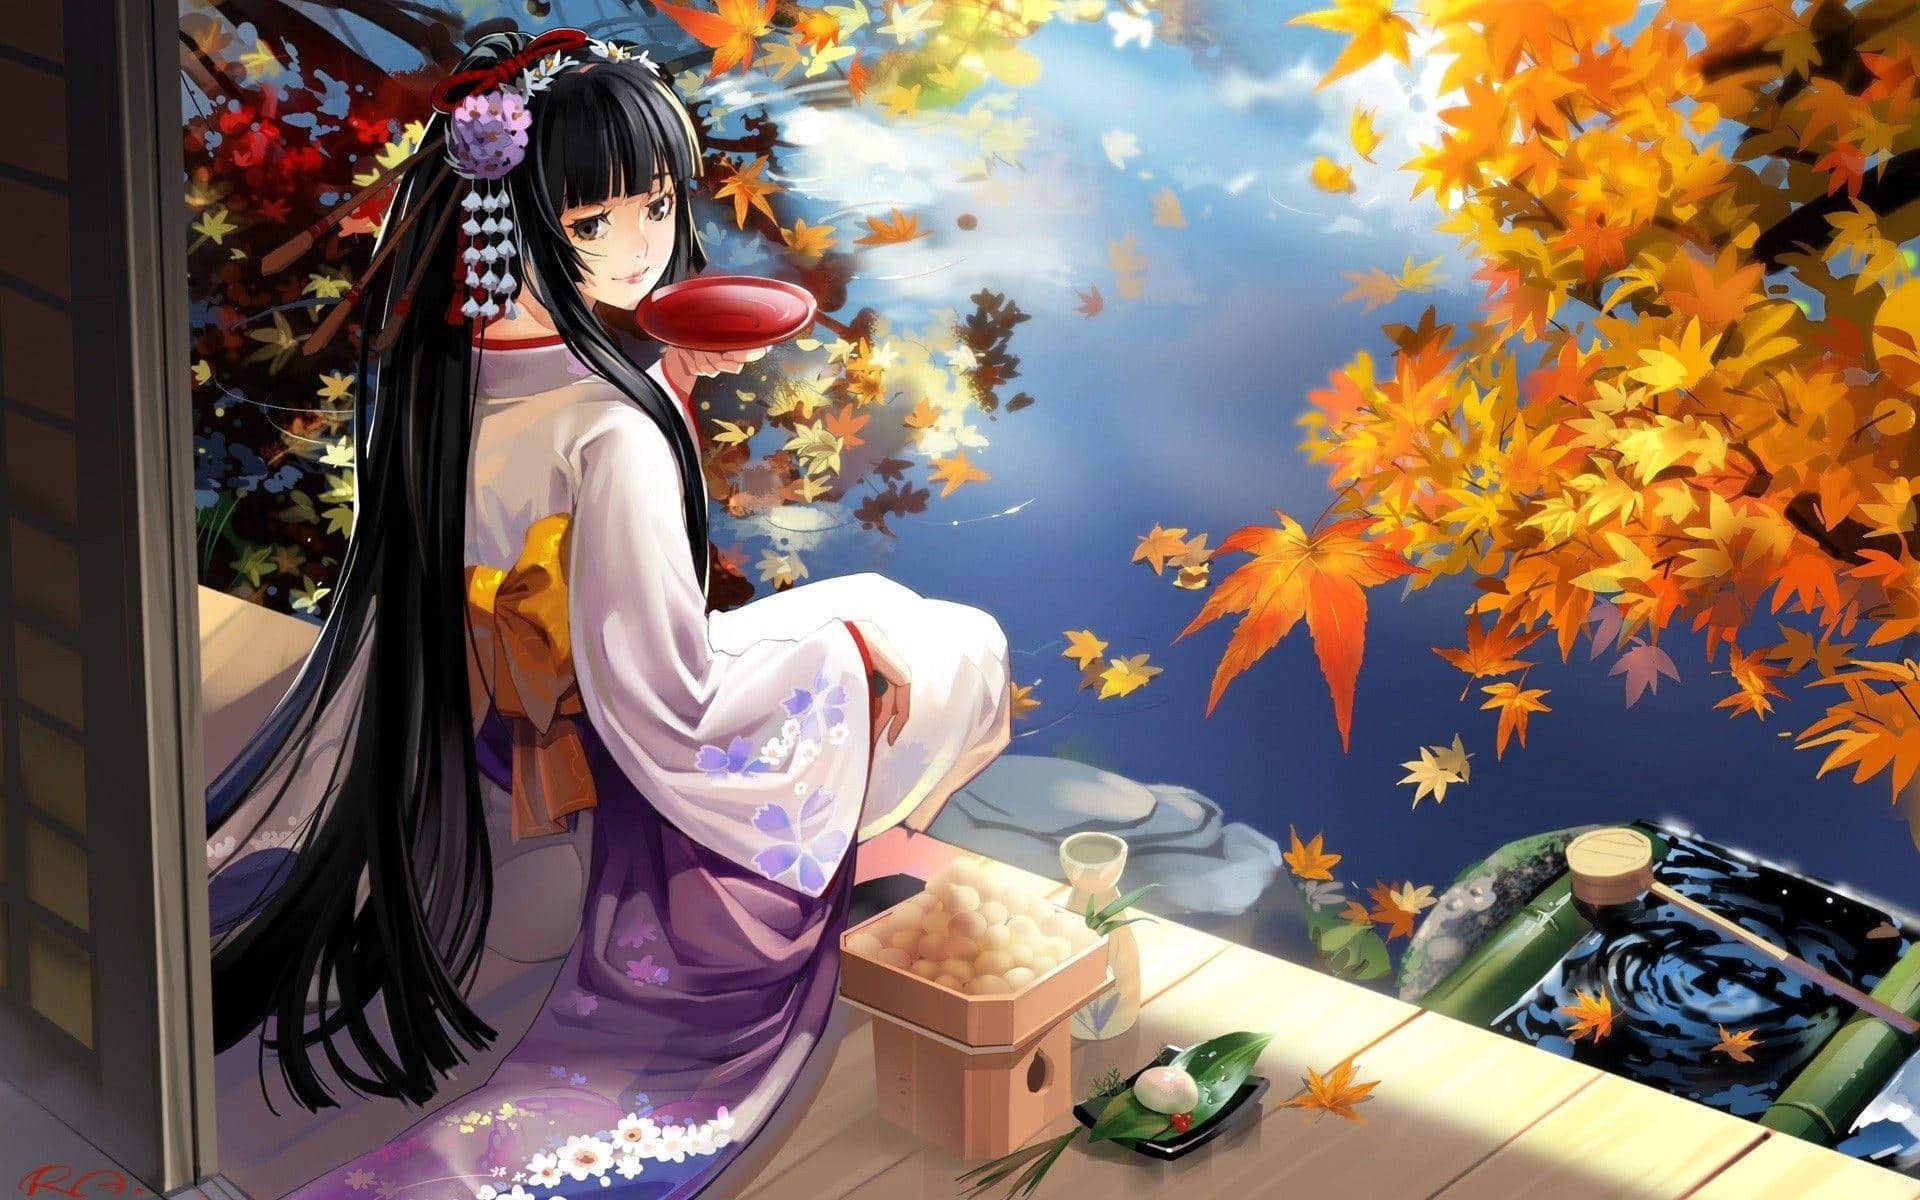 Anime girl sitting on a porch surrounded by autumn leaves, showcasing the beauty of the season